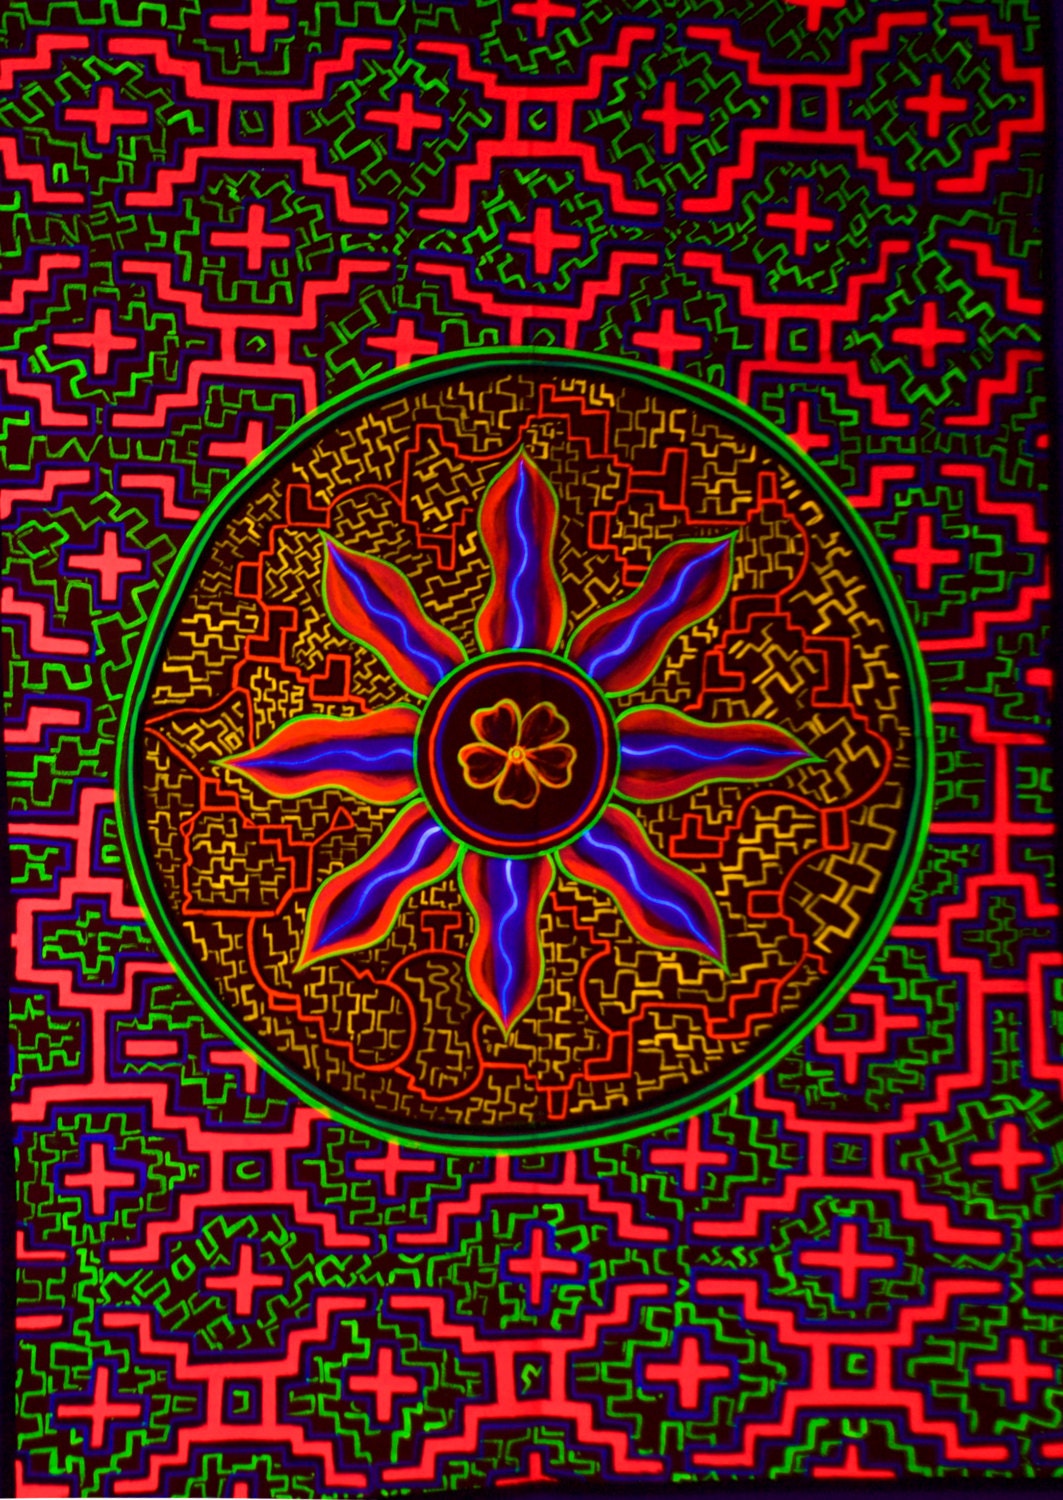 Ayahuasca Flower UV Painting - 90x60cm - handmade on order - fully blacklight glowing colors - psychedelic dmt visionary artwork